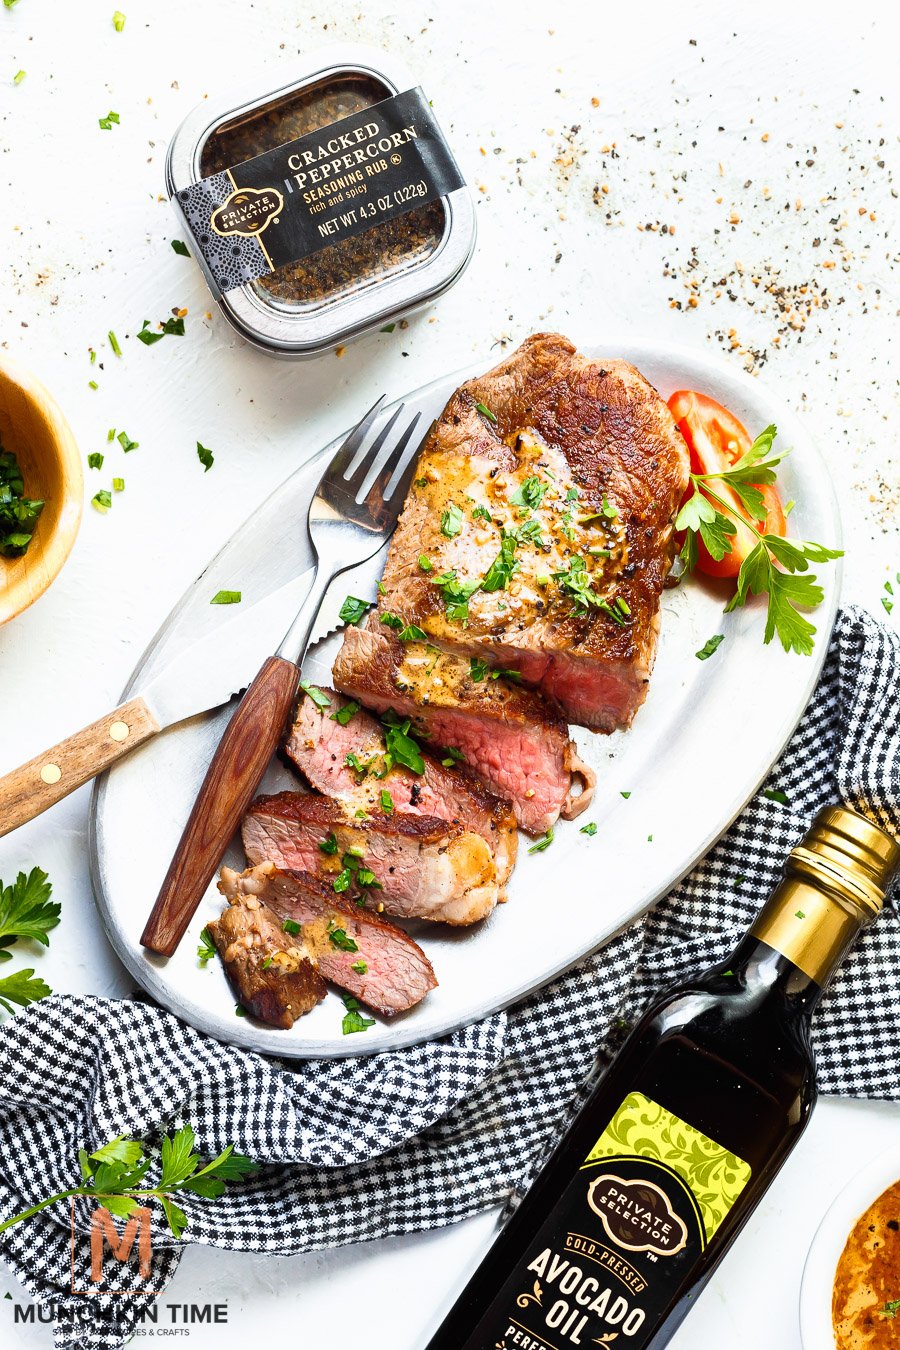 Easy Steak au Poivre Recipe - It is made of high quality sirloin steaks, Private Selection Cracked Peppercorn Seasoning Rub, my favorite Private Selection Avocado Oil,  and a Secret Ingredient to make a delicious Pepper Sauce for Steak.